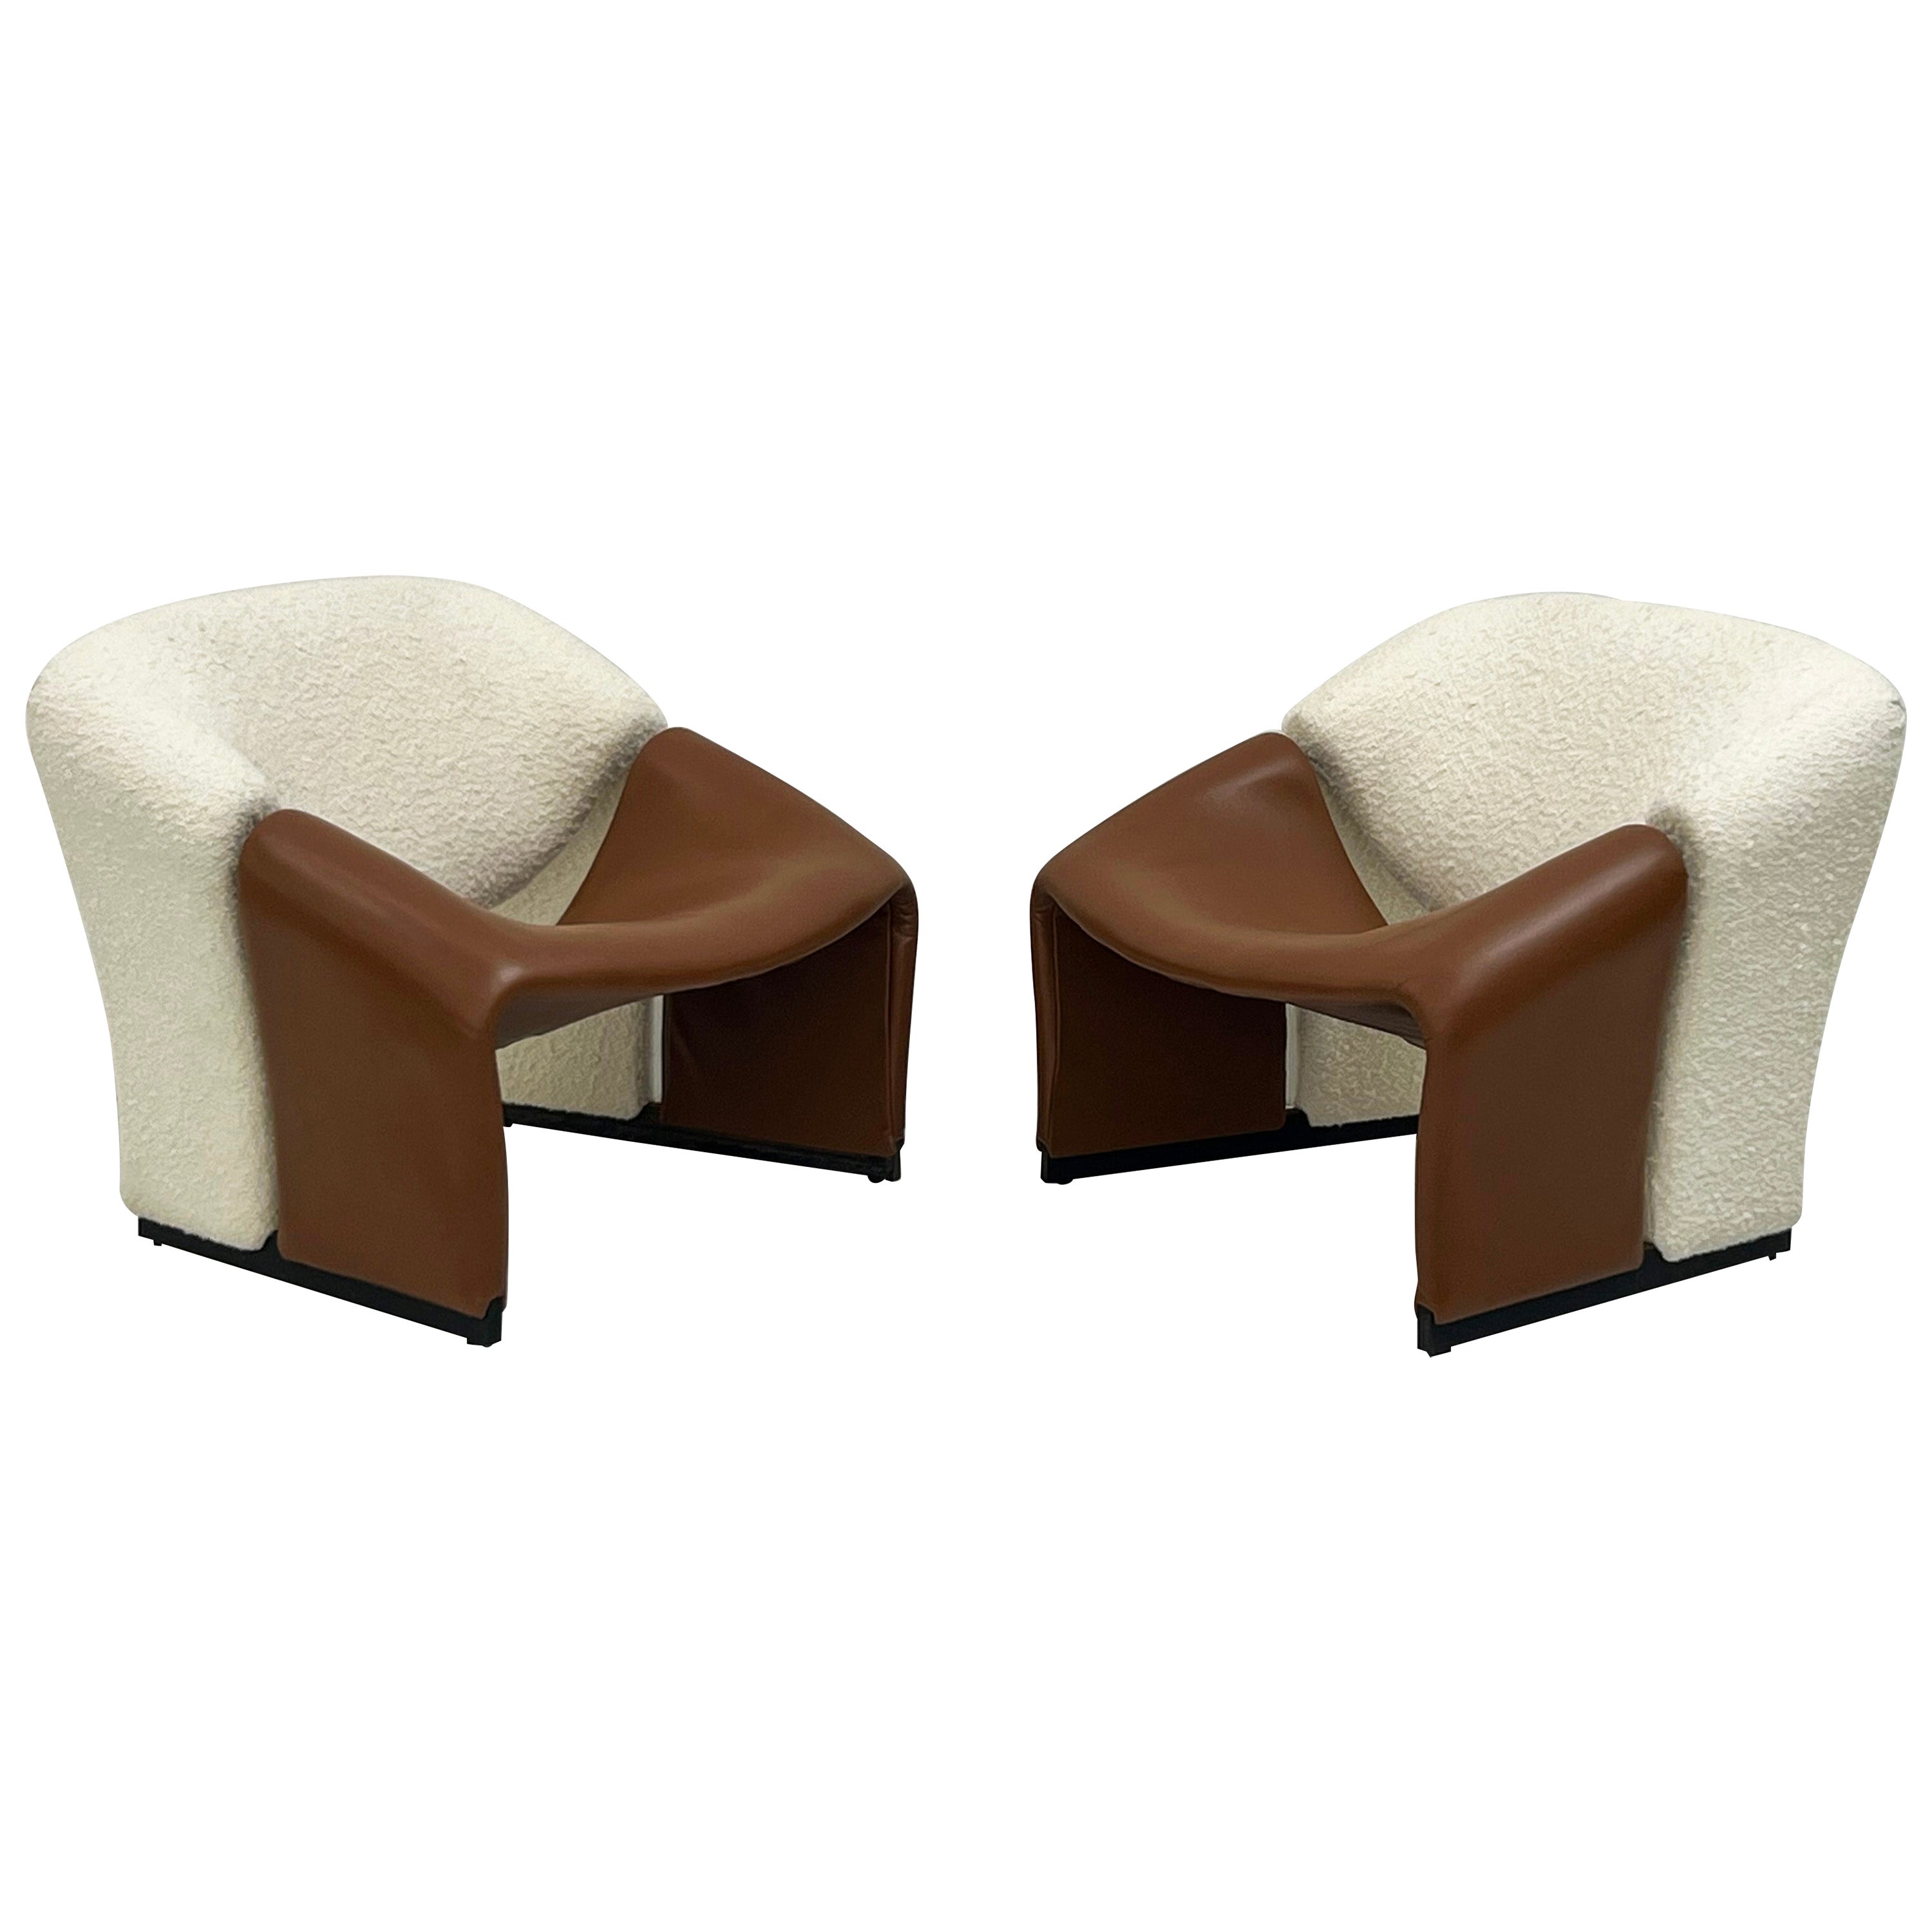 1st Edition Pierre Paulin Groovy Chairs, Artifort F580, Ivory Boucle and Leather